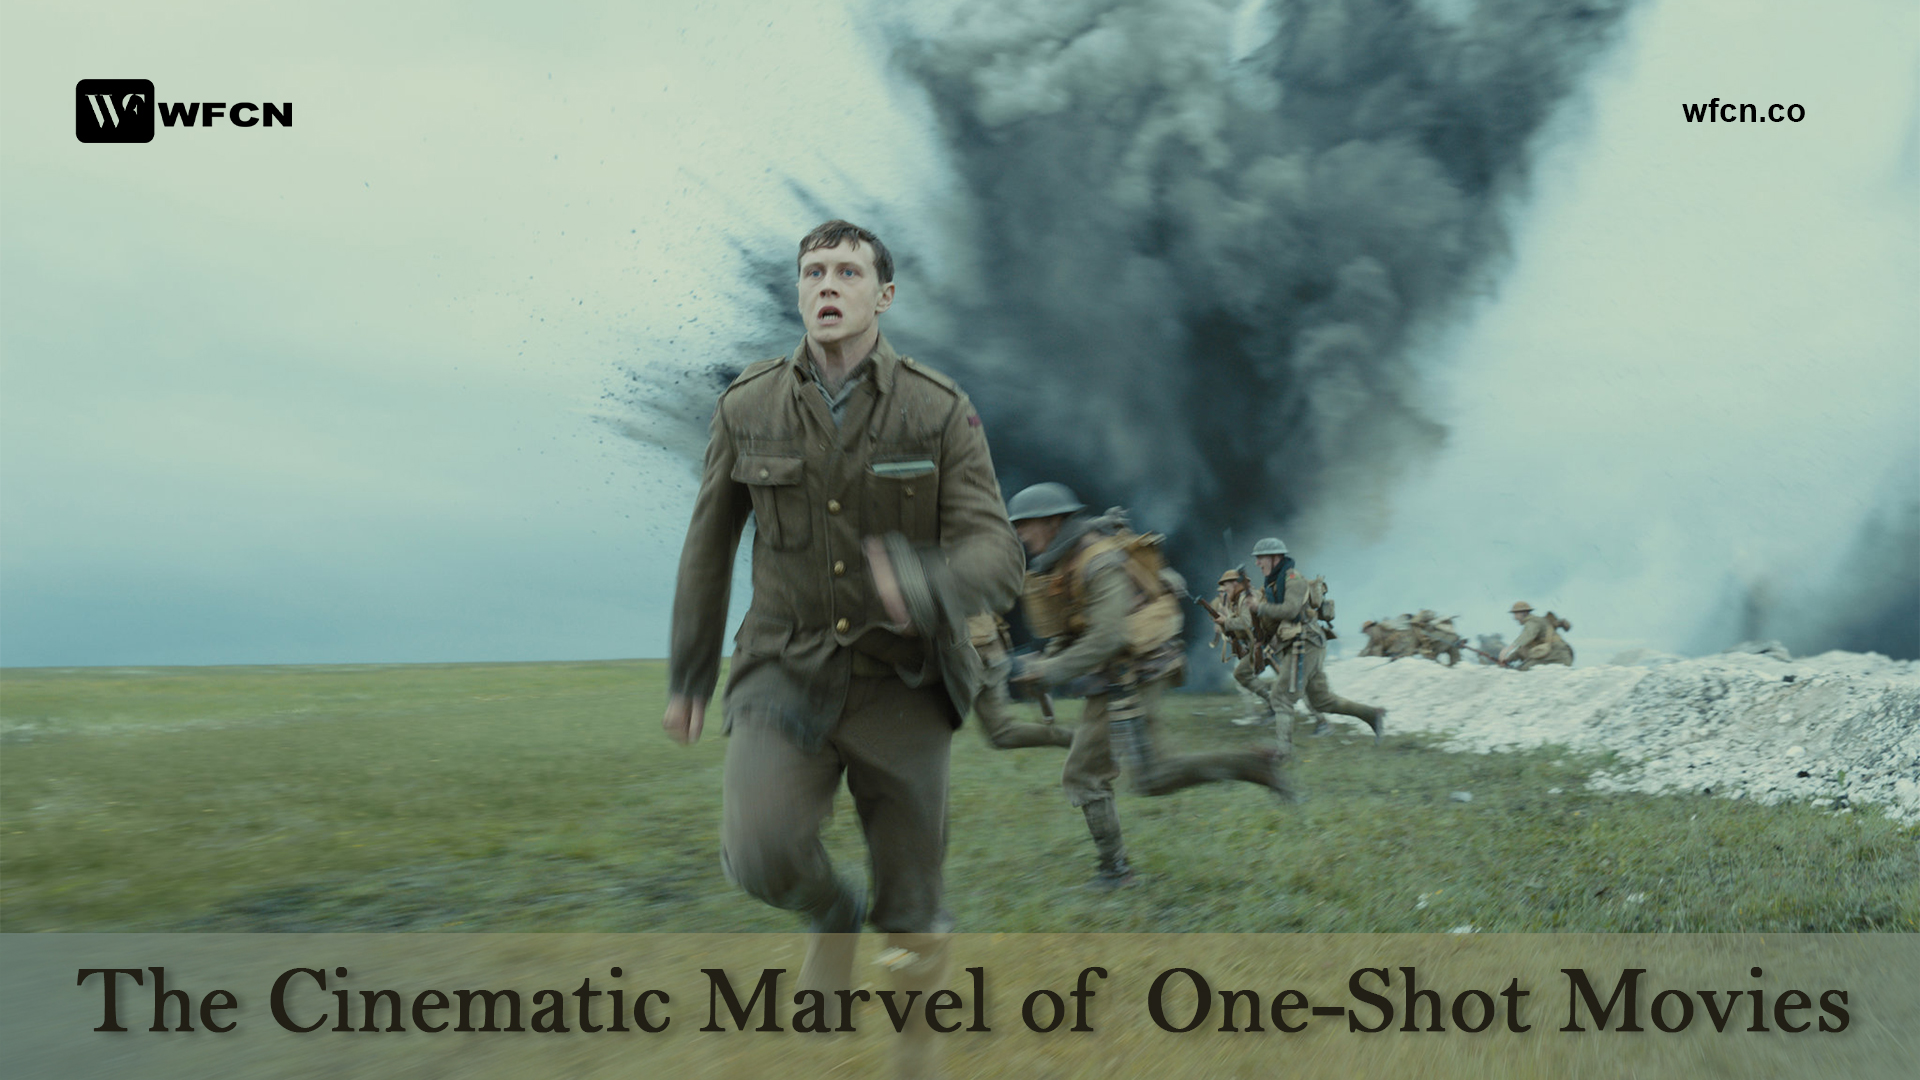 The Cinematic Marvel of One-Shot Movies